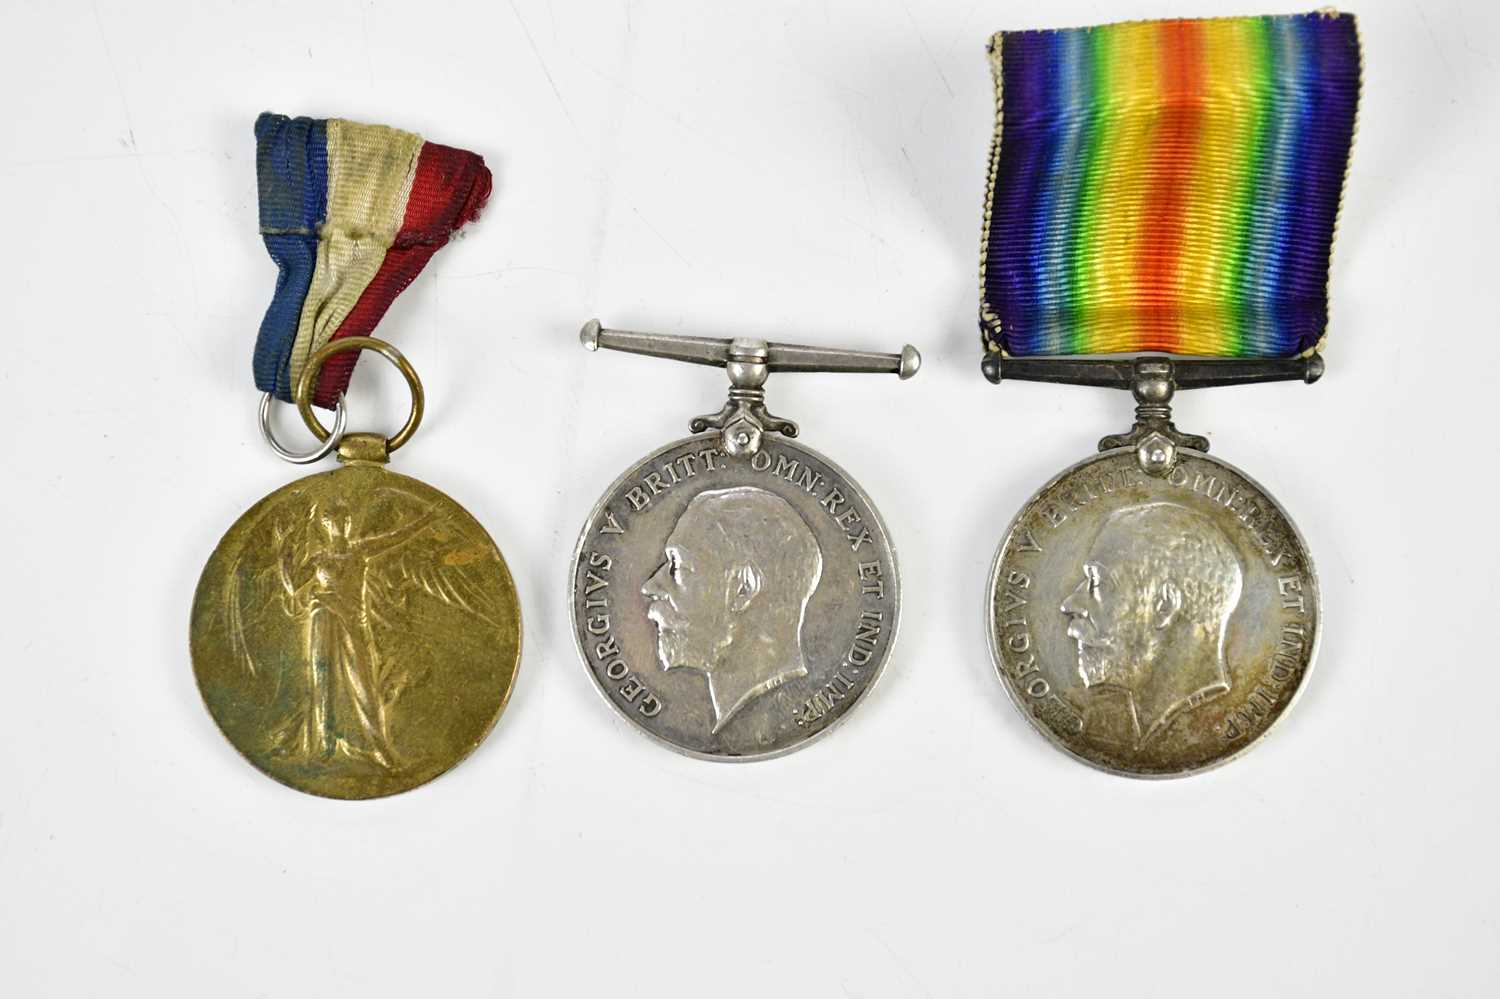 Two WWI British War Medals, awarded to 400427 Pte G.R. Goddard Manch R, and to 404393 Pte E. Lowcock